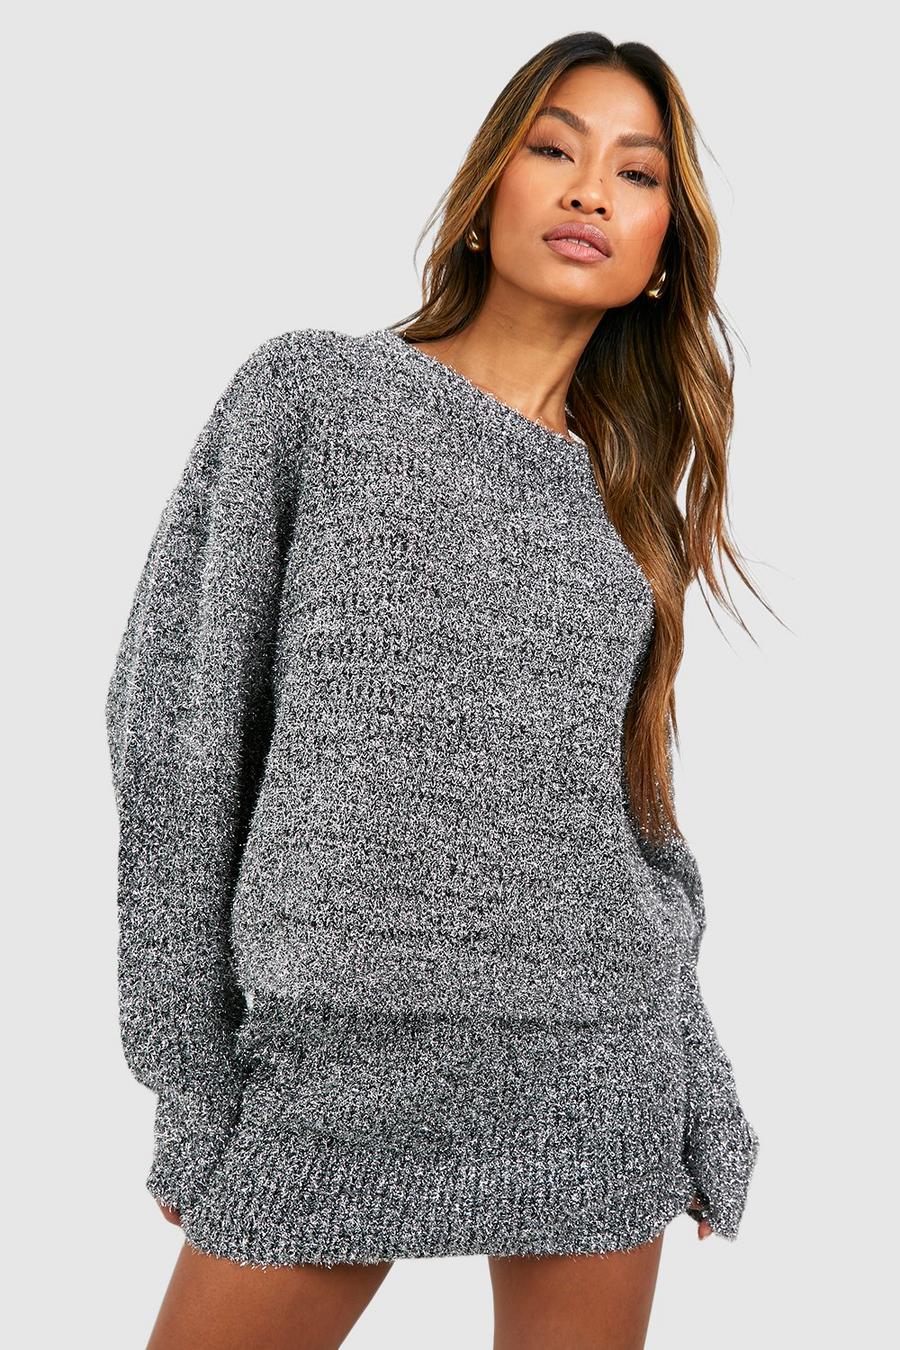 Silver Tinsel Knit Sweater